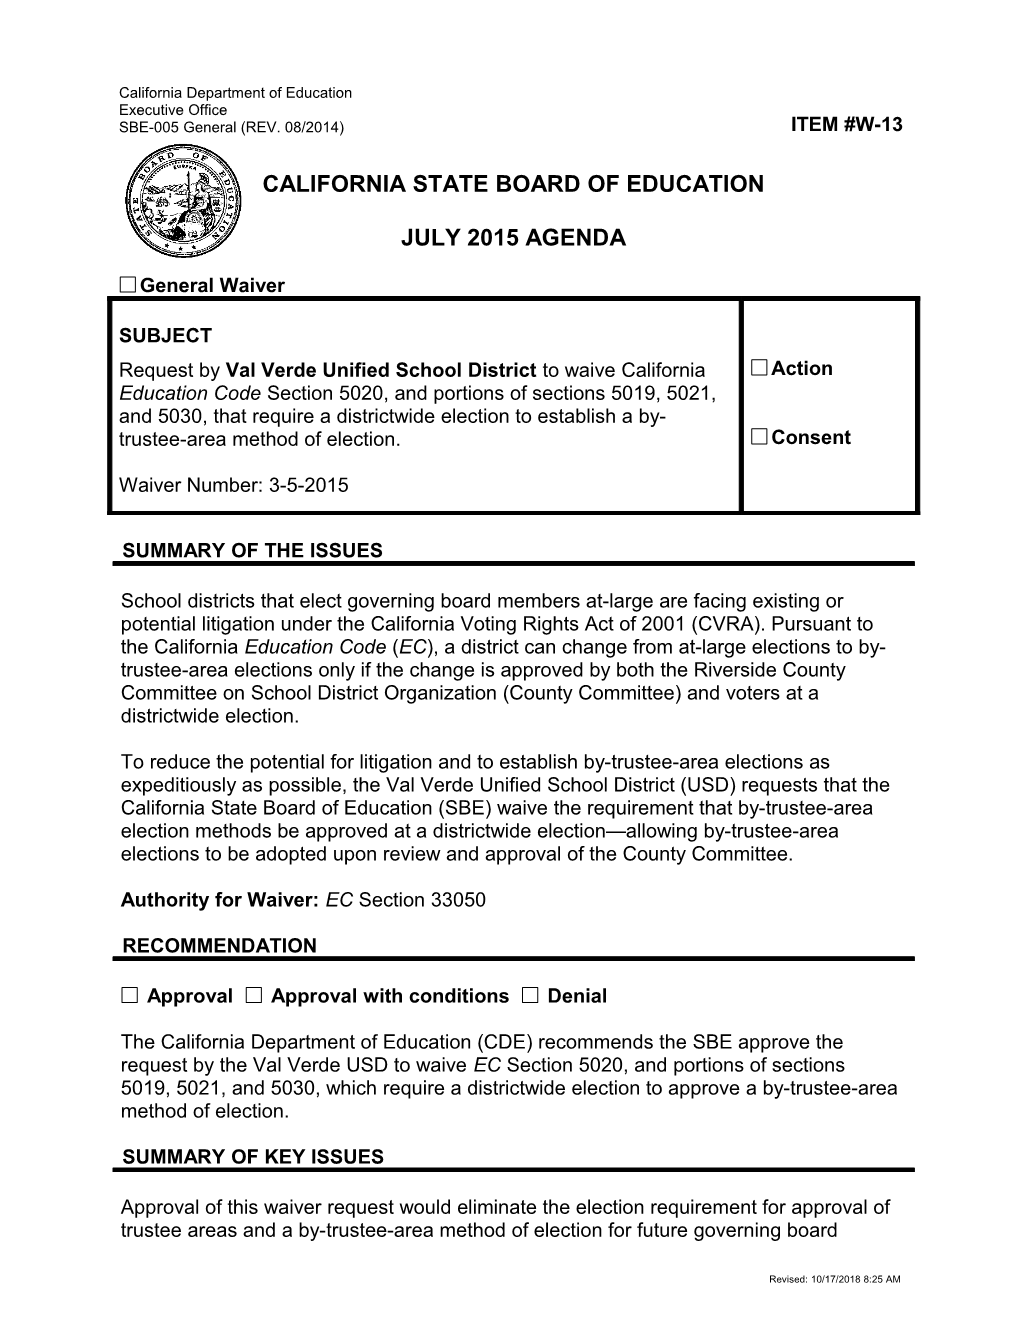 July 2015 Waiver Item W-13 - Meeting Agendas (CA State Board of Education)